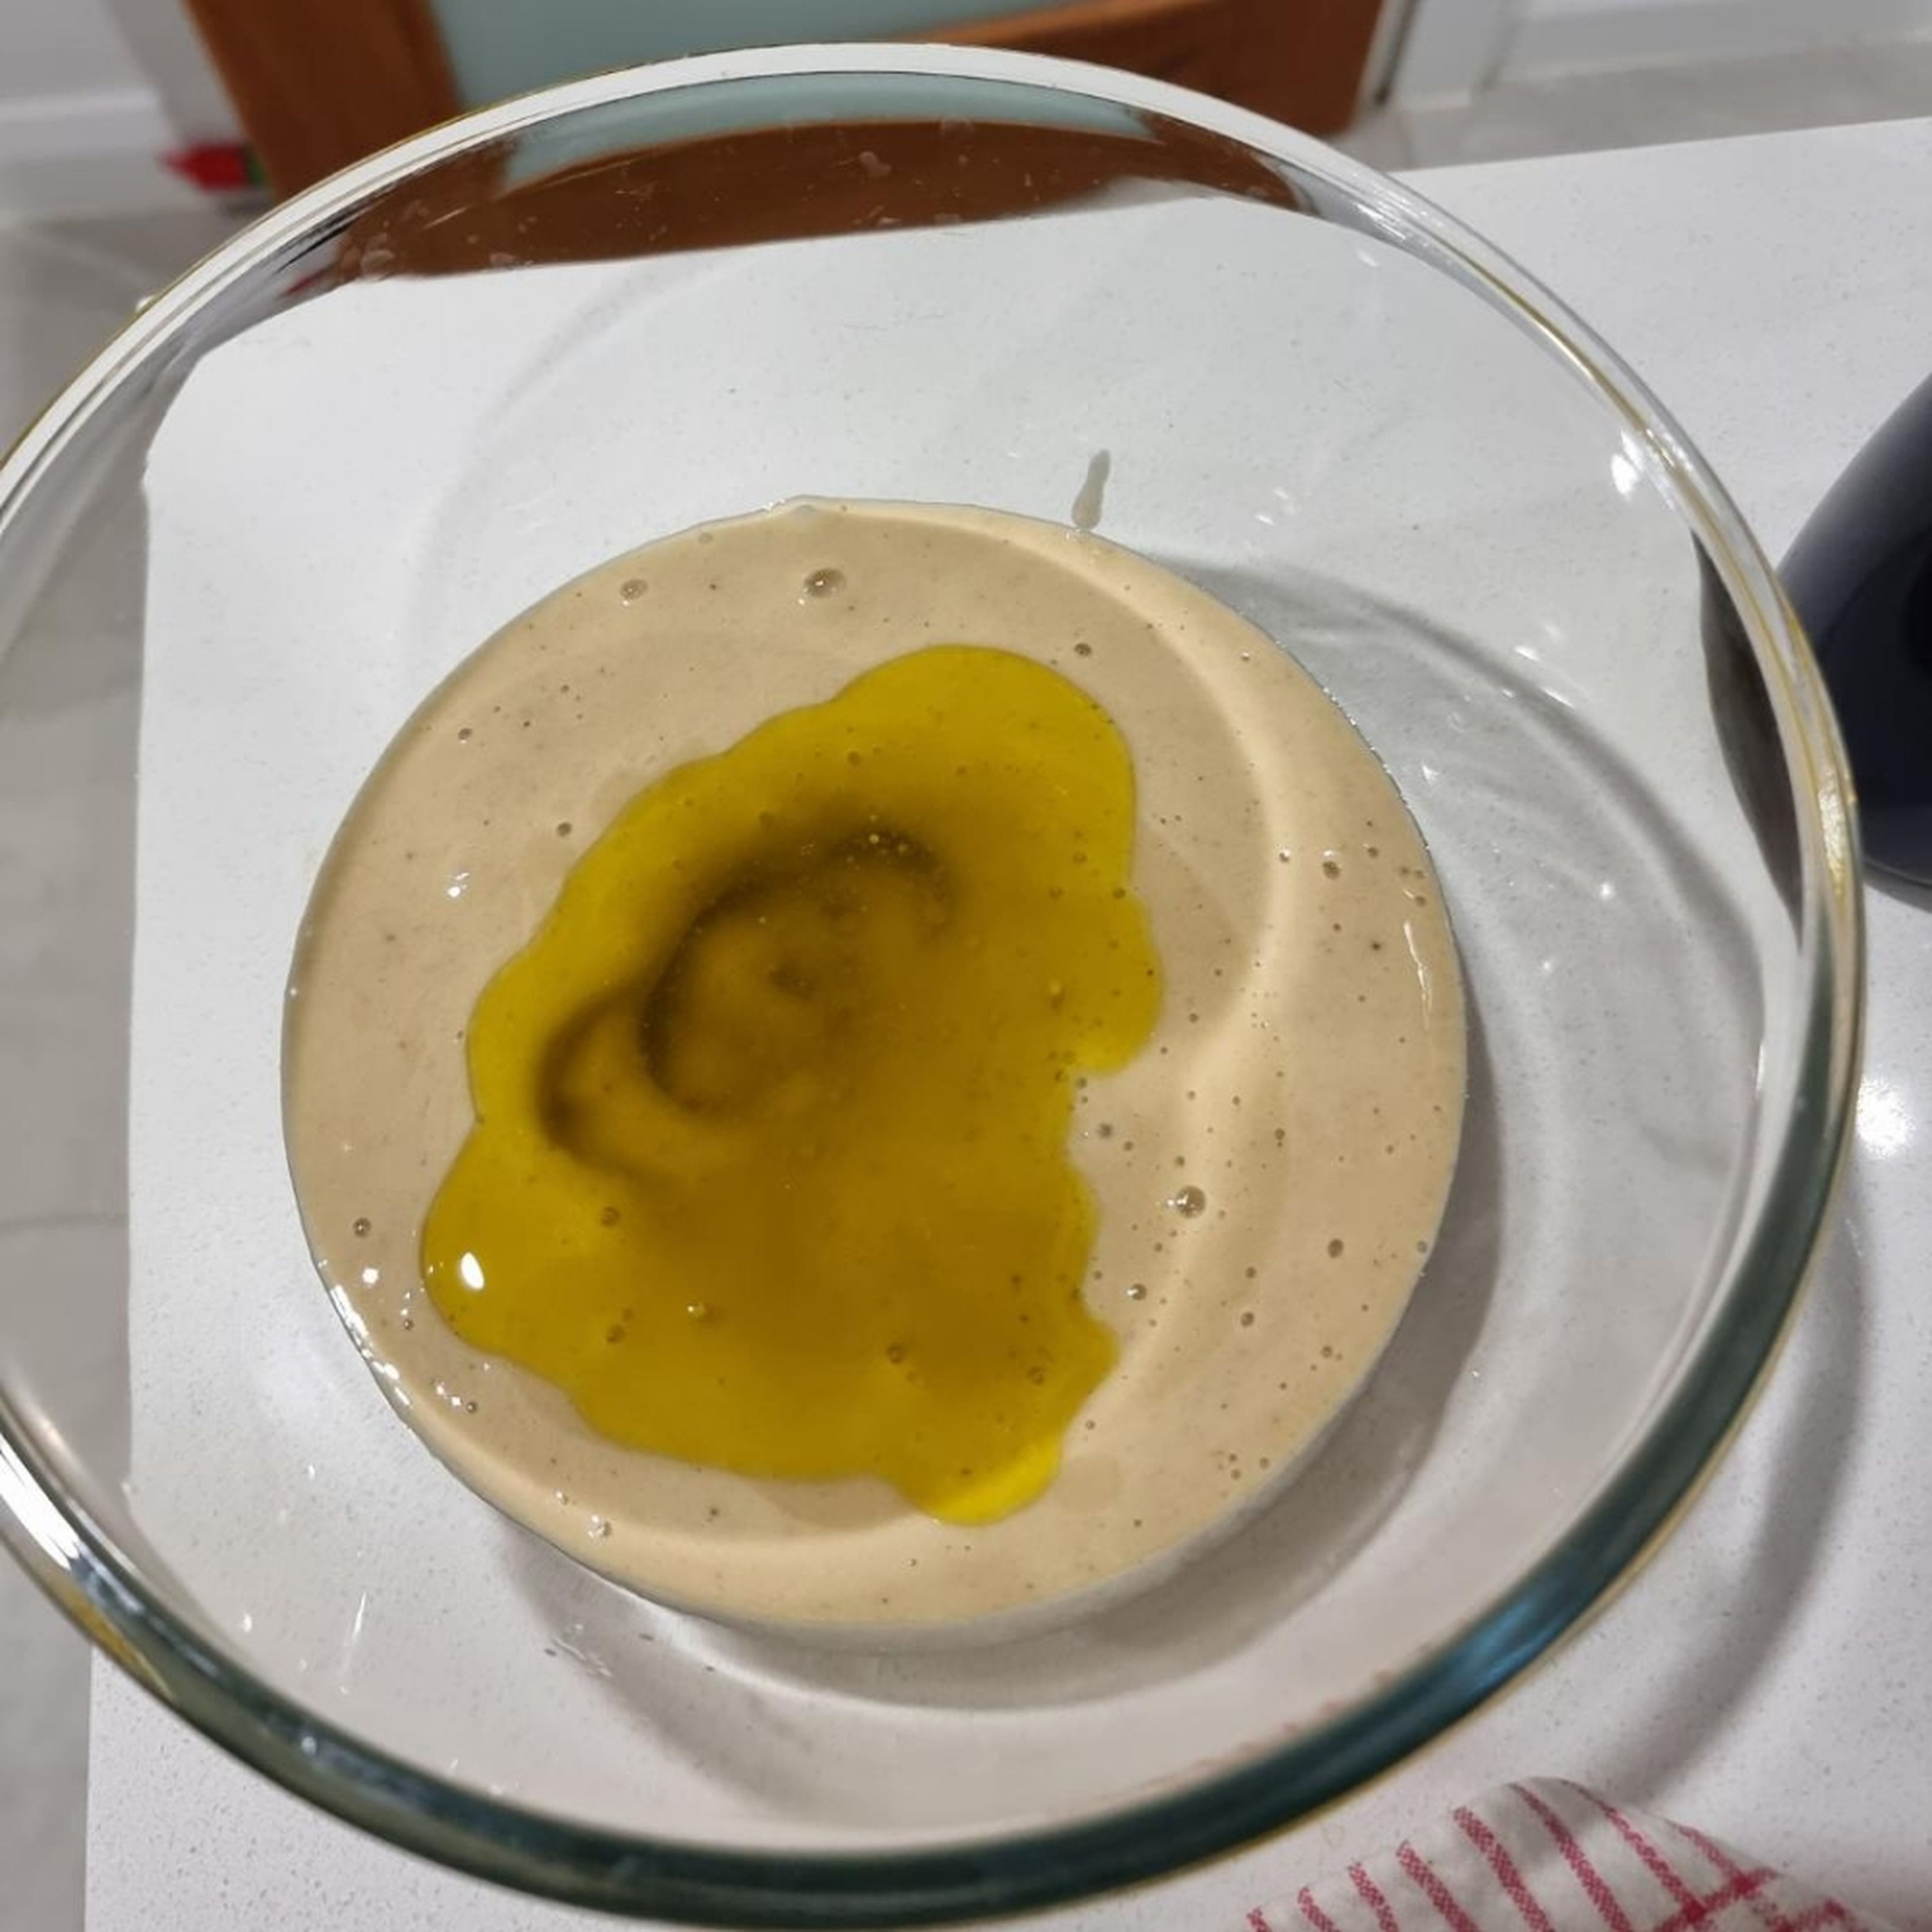 put the banana puree in a bowl and add oil .mix it well